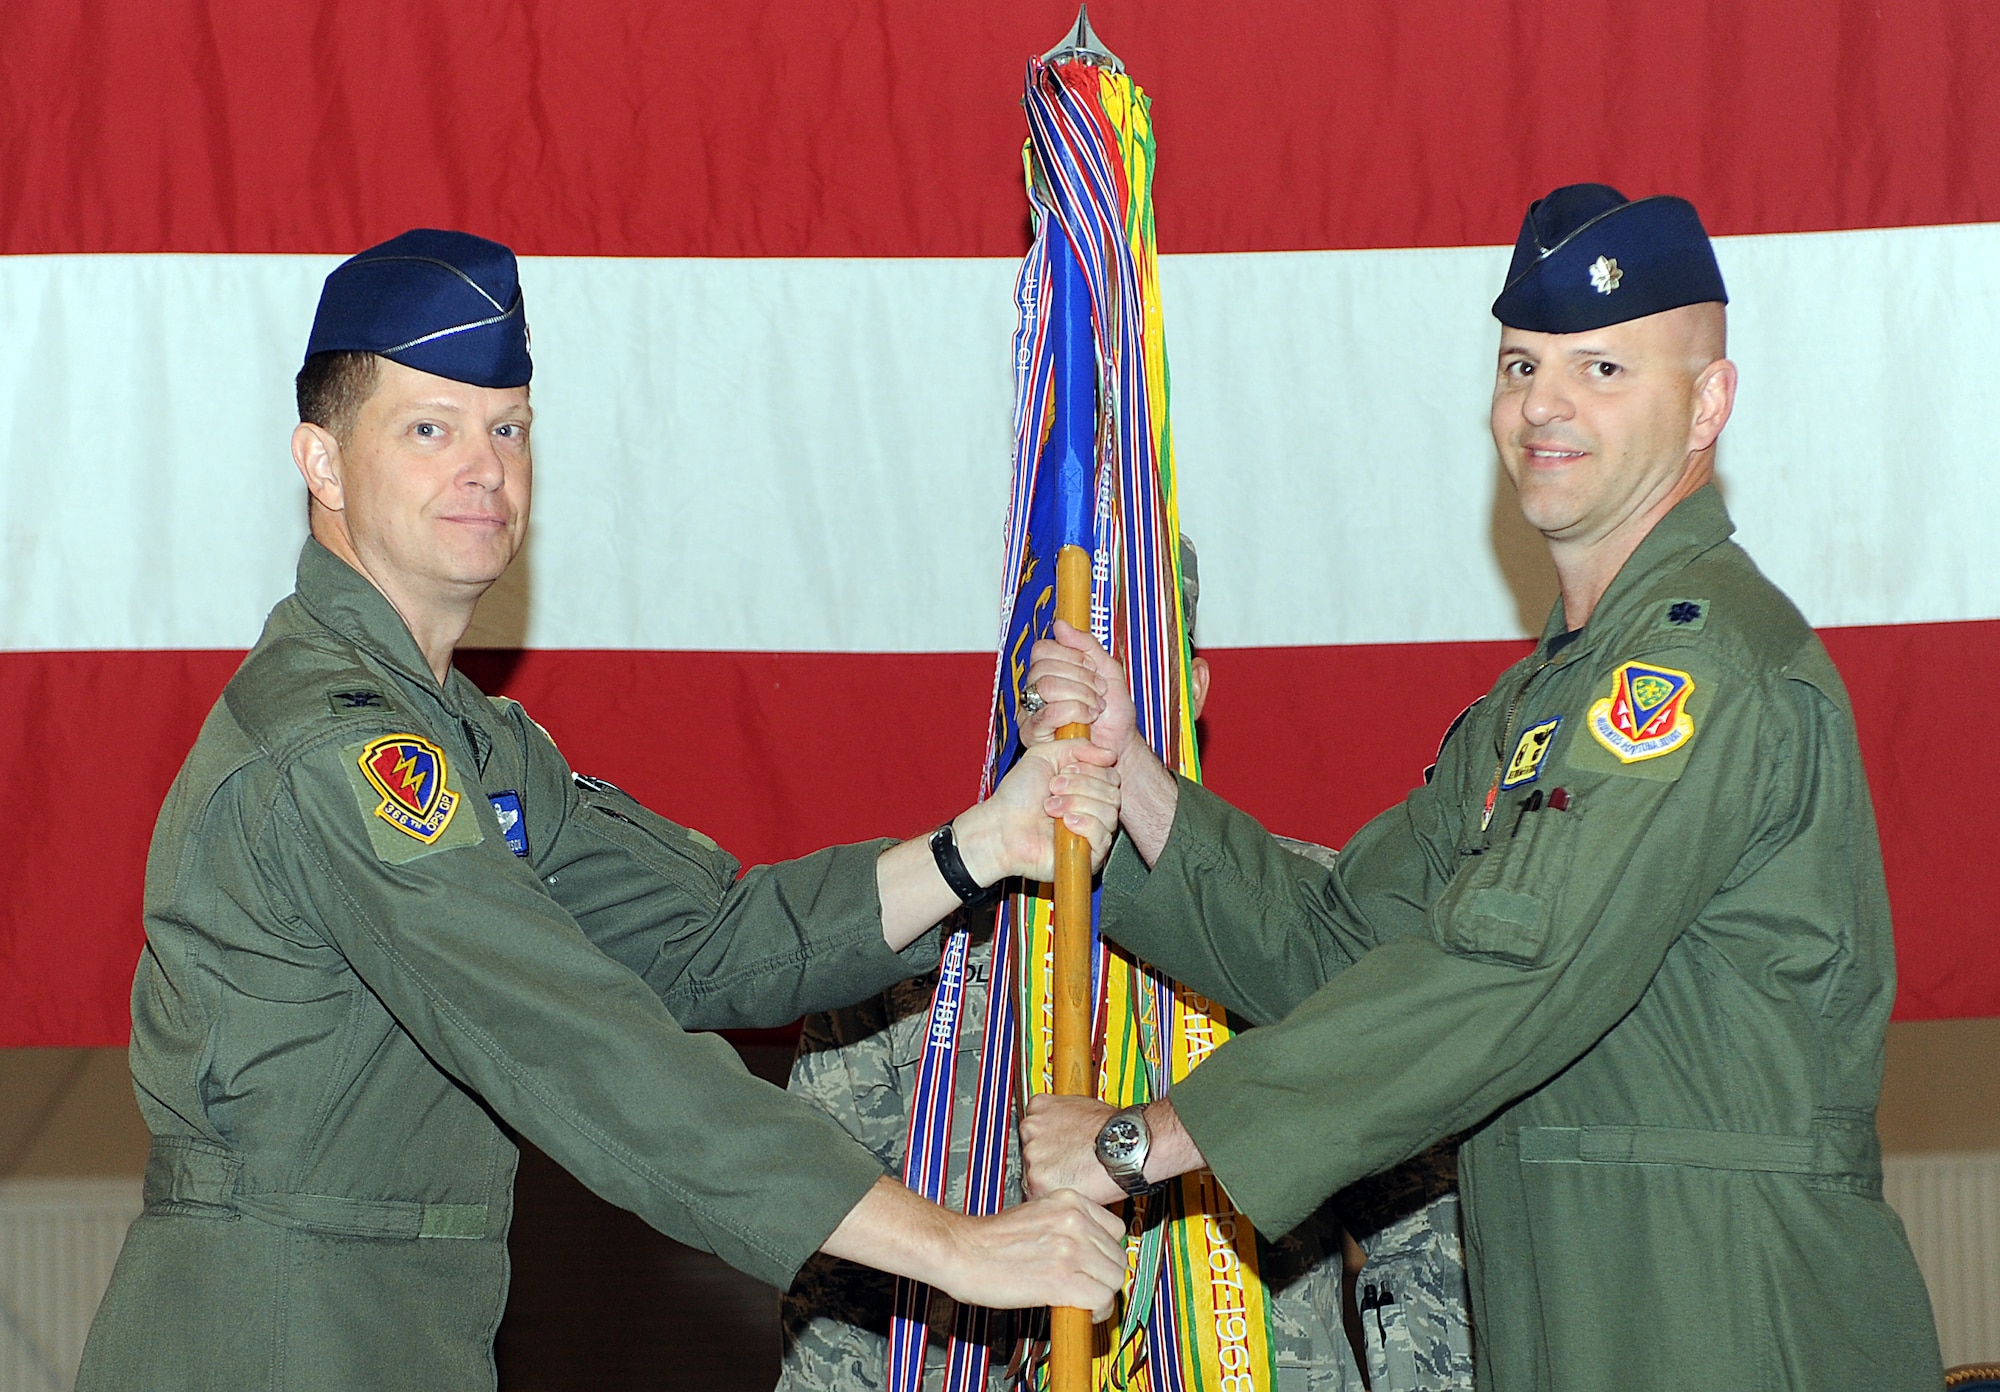 MOUNTAIN HOME AIR FORCE BASE, Idaho – Col. Kyle Robinson, 366th Operations Group commander, passes the guidon to Lt. Col. Donald McFatridge, 390th Electronic Combat Squadron commander during a re-designation ceremony in hangar 1331, Sept 27. The 390th ECS is responsible for training aircrews to operate the EA-6B Prowler, and started the transition to the E/F-18G Growler.  Today the Airmen of the 390th ECS deploy with U.S. Navy squadrons to hotspots around the globe.(U.S. Air Force photo by Senior Airman Debbie Lockhart)